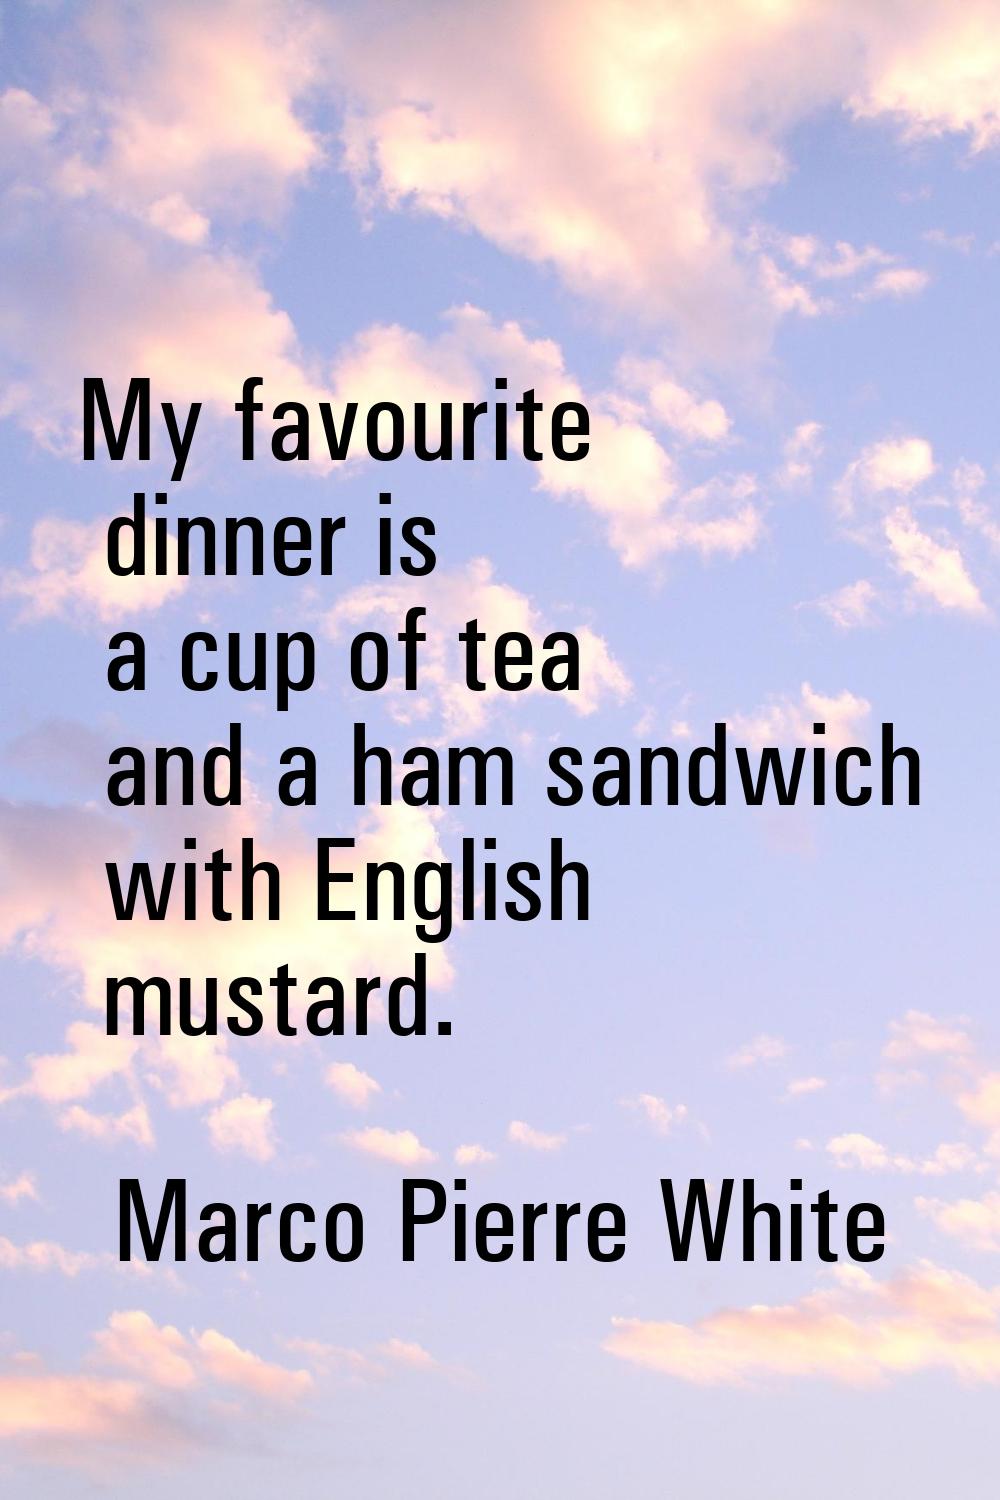 My favourite dinner is a cup of tea and a ham sandwich with English mustard.